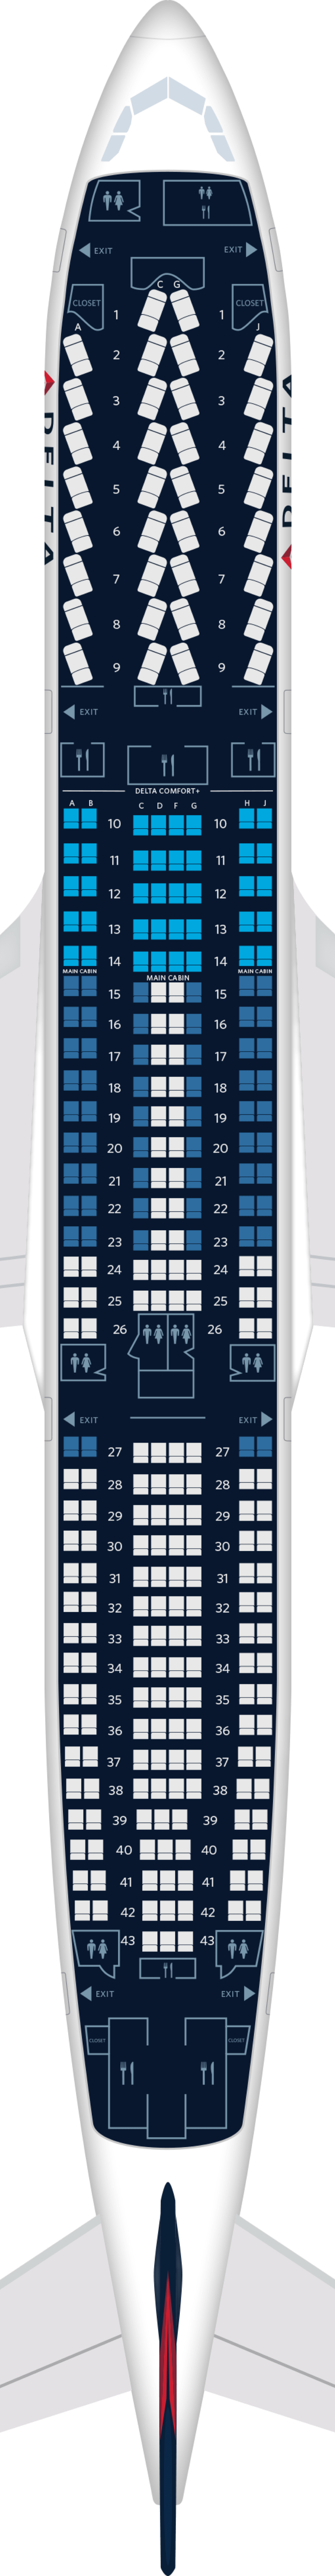 Delta Airbus A Seat Map Hot Sex Picture